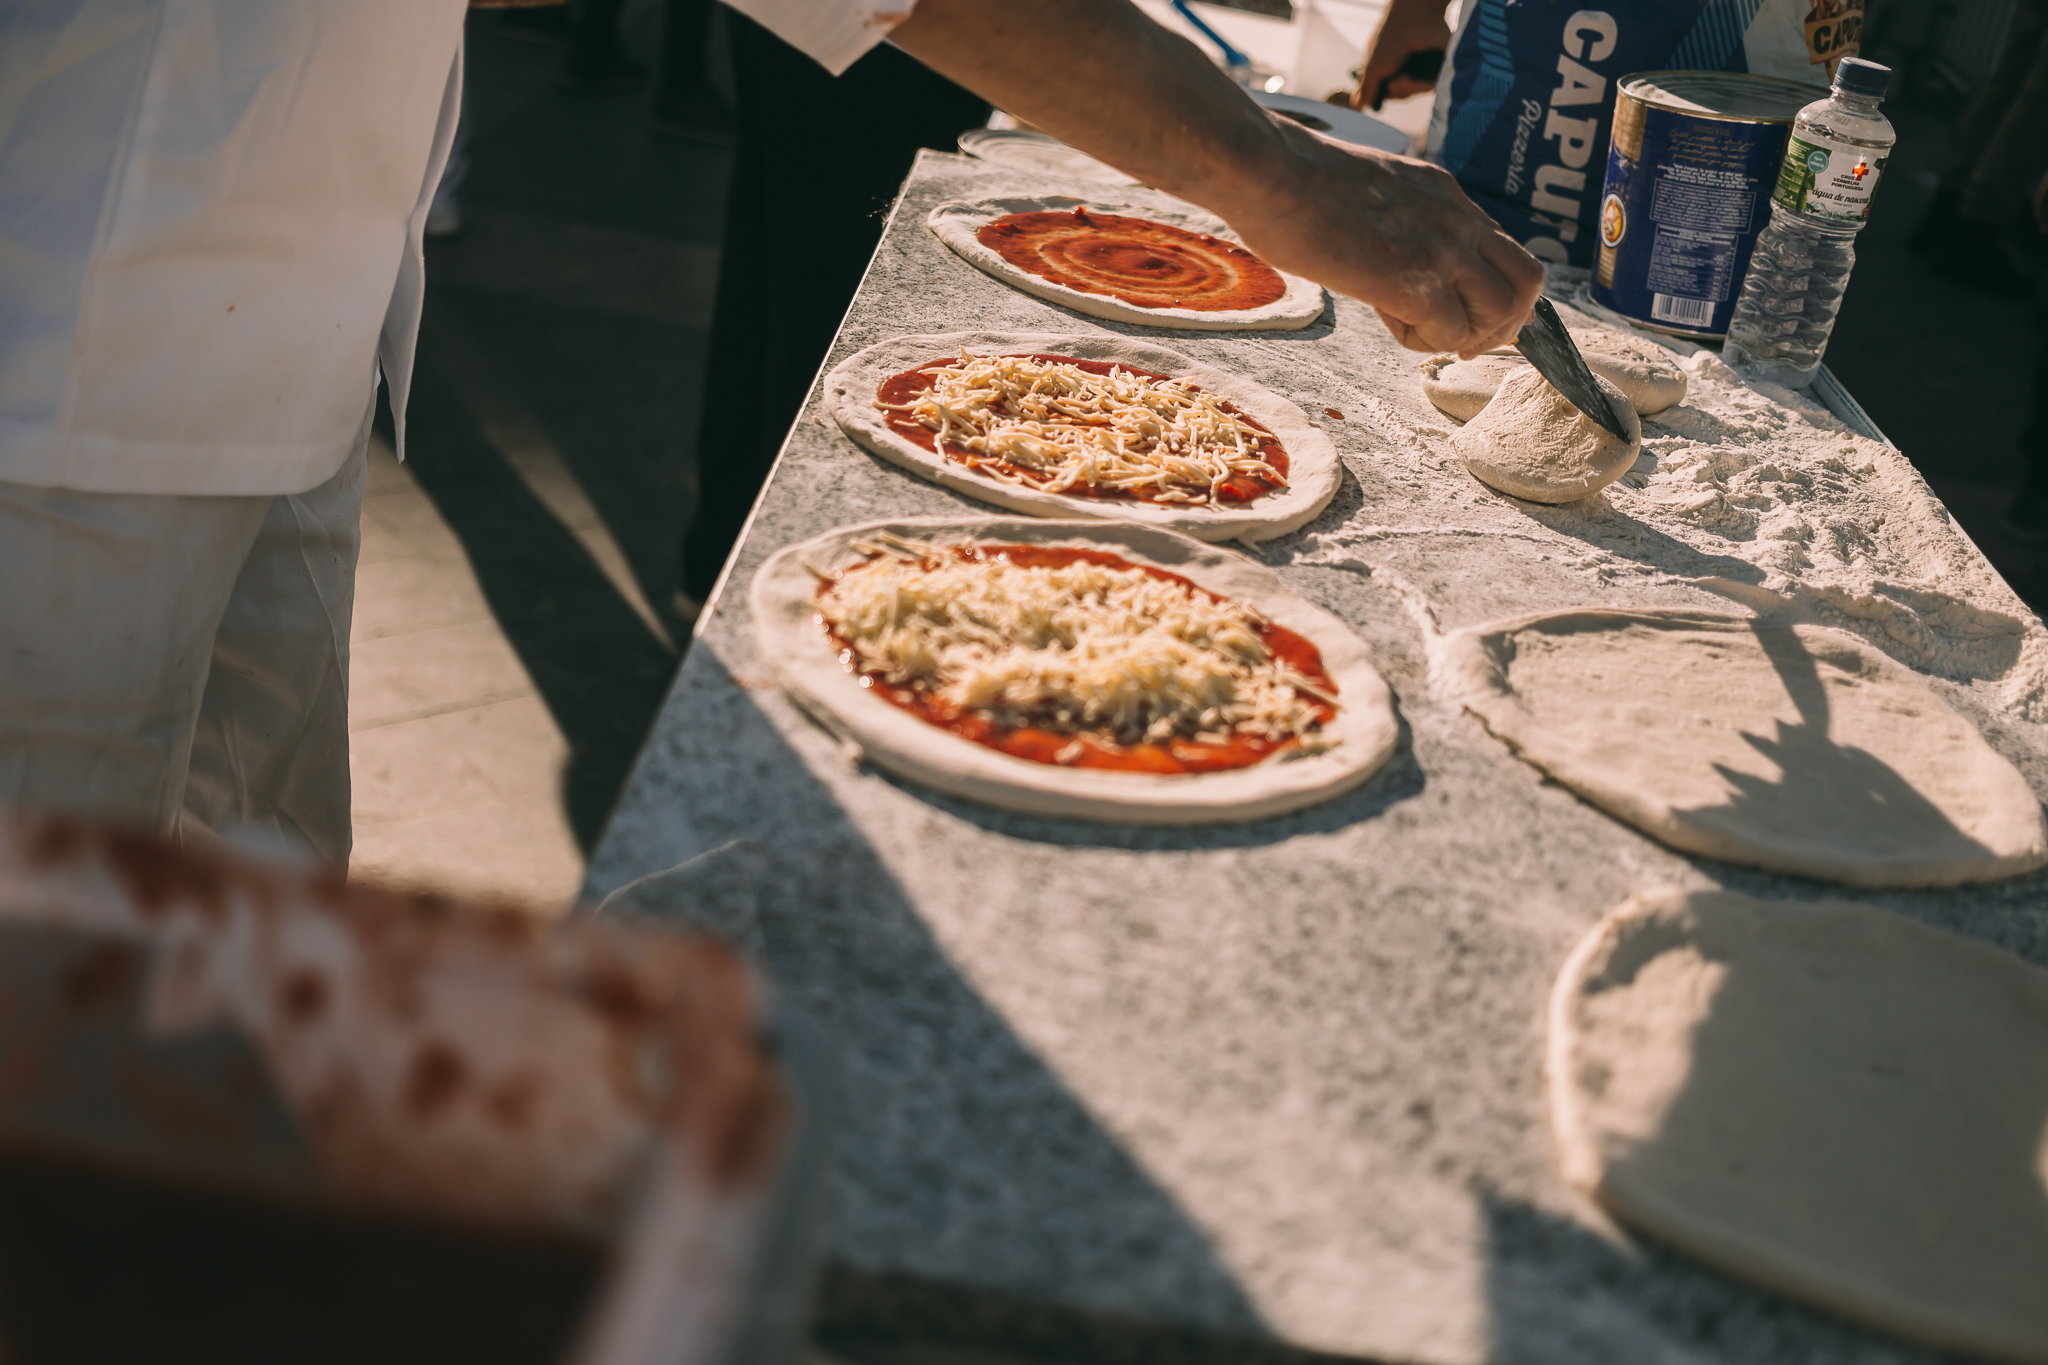 assets/images/miguel-oliveira-point-and-shoot-pizza-solidaria-170.jpg